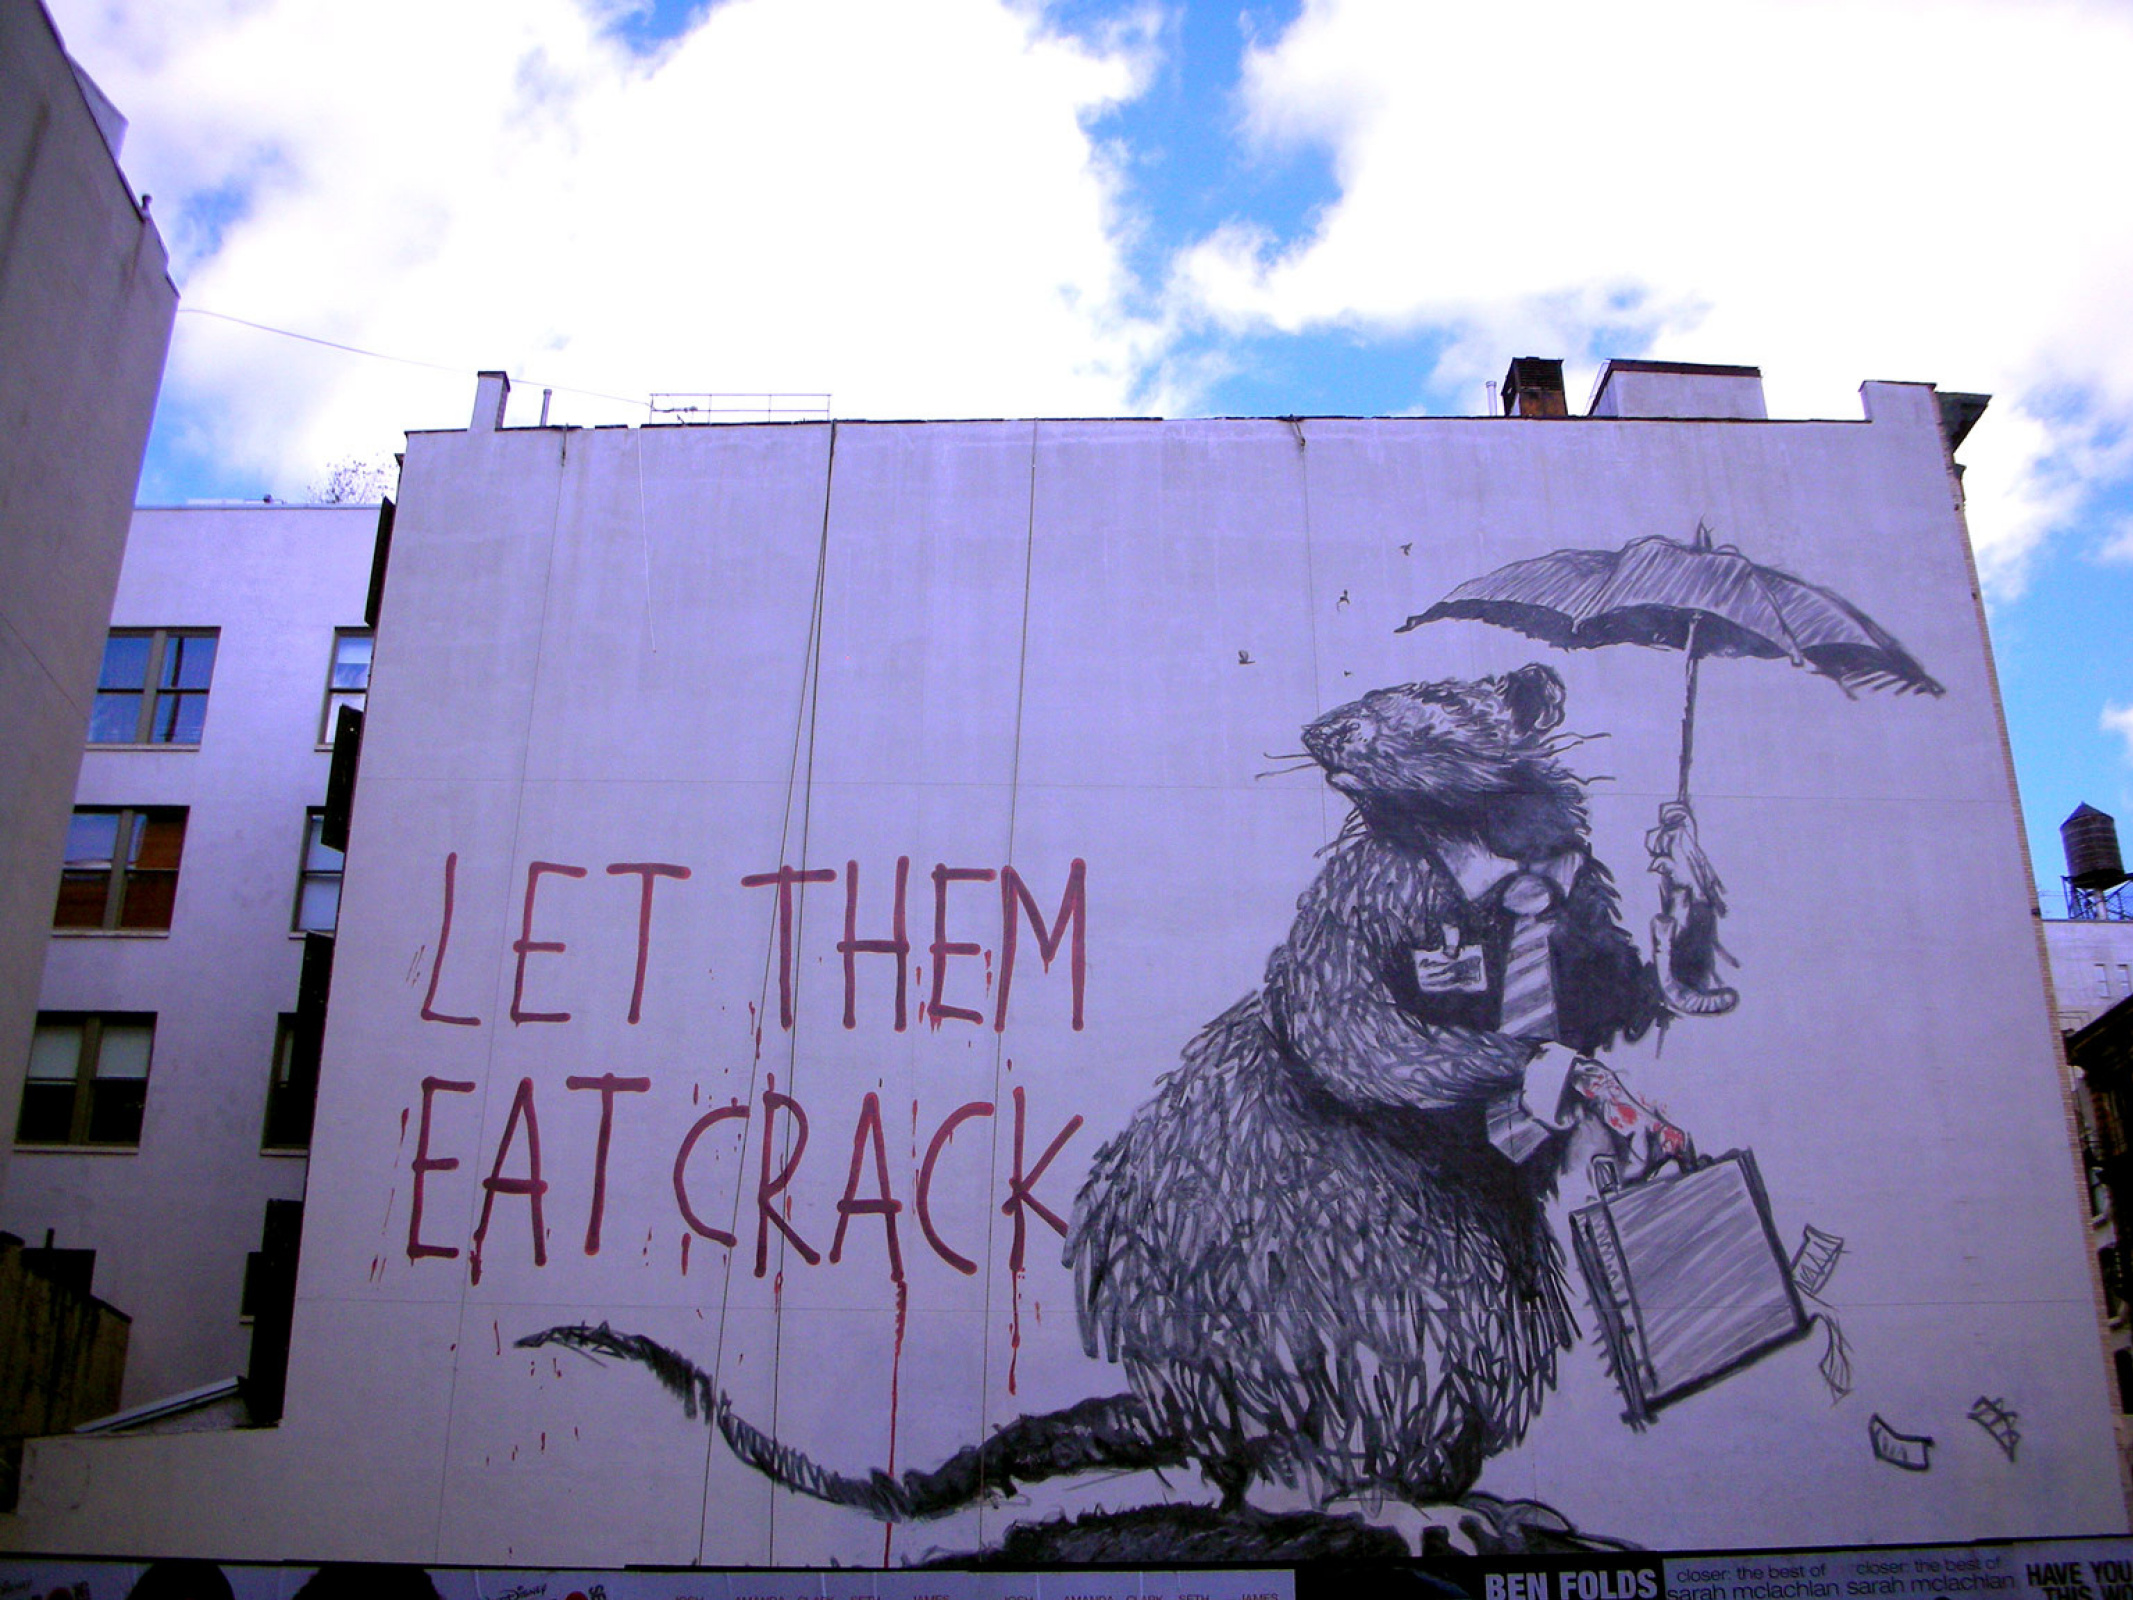 Let them eat crack, 2008 by Banksy: History, Analysis & Facts